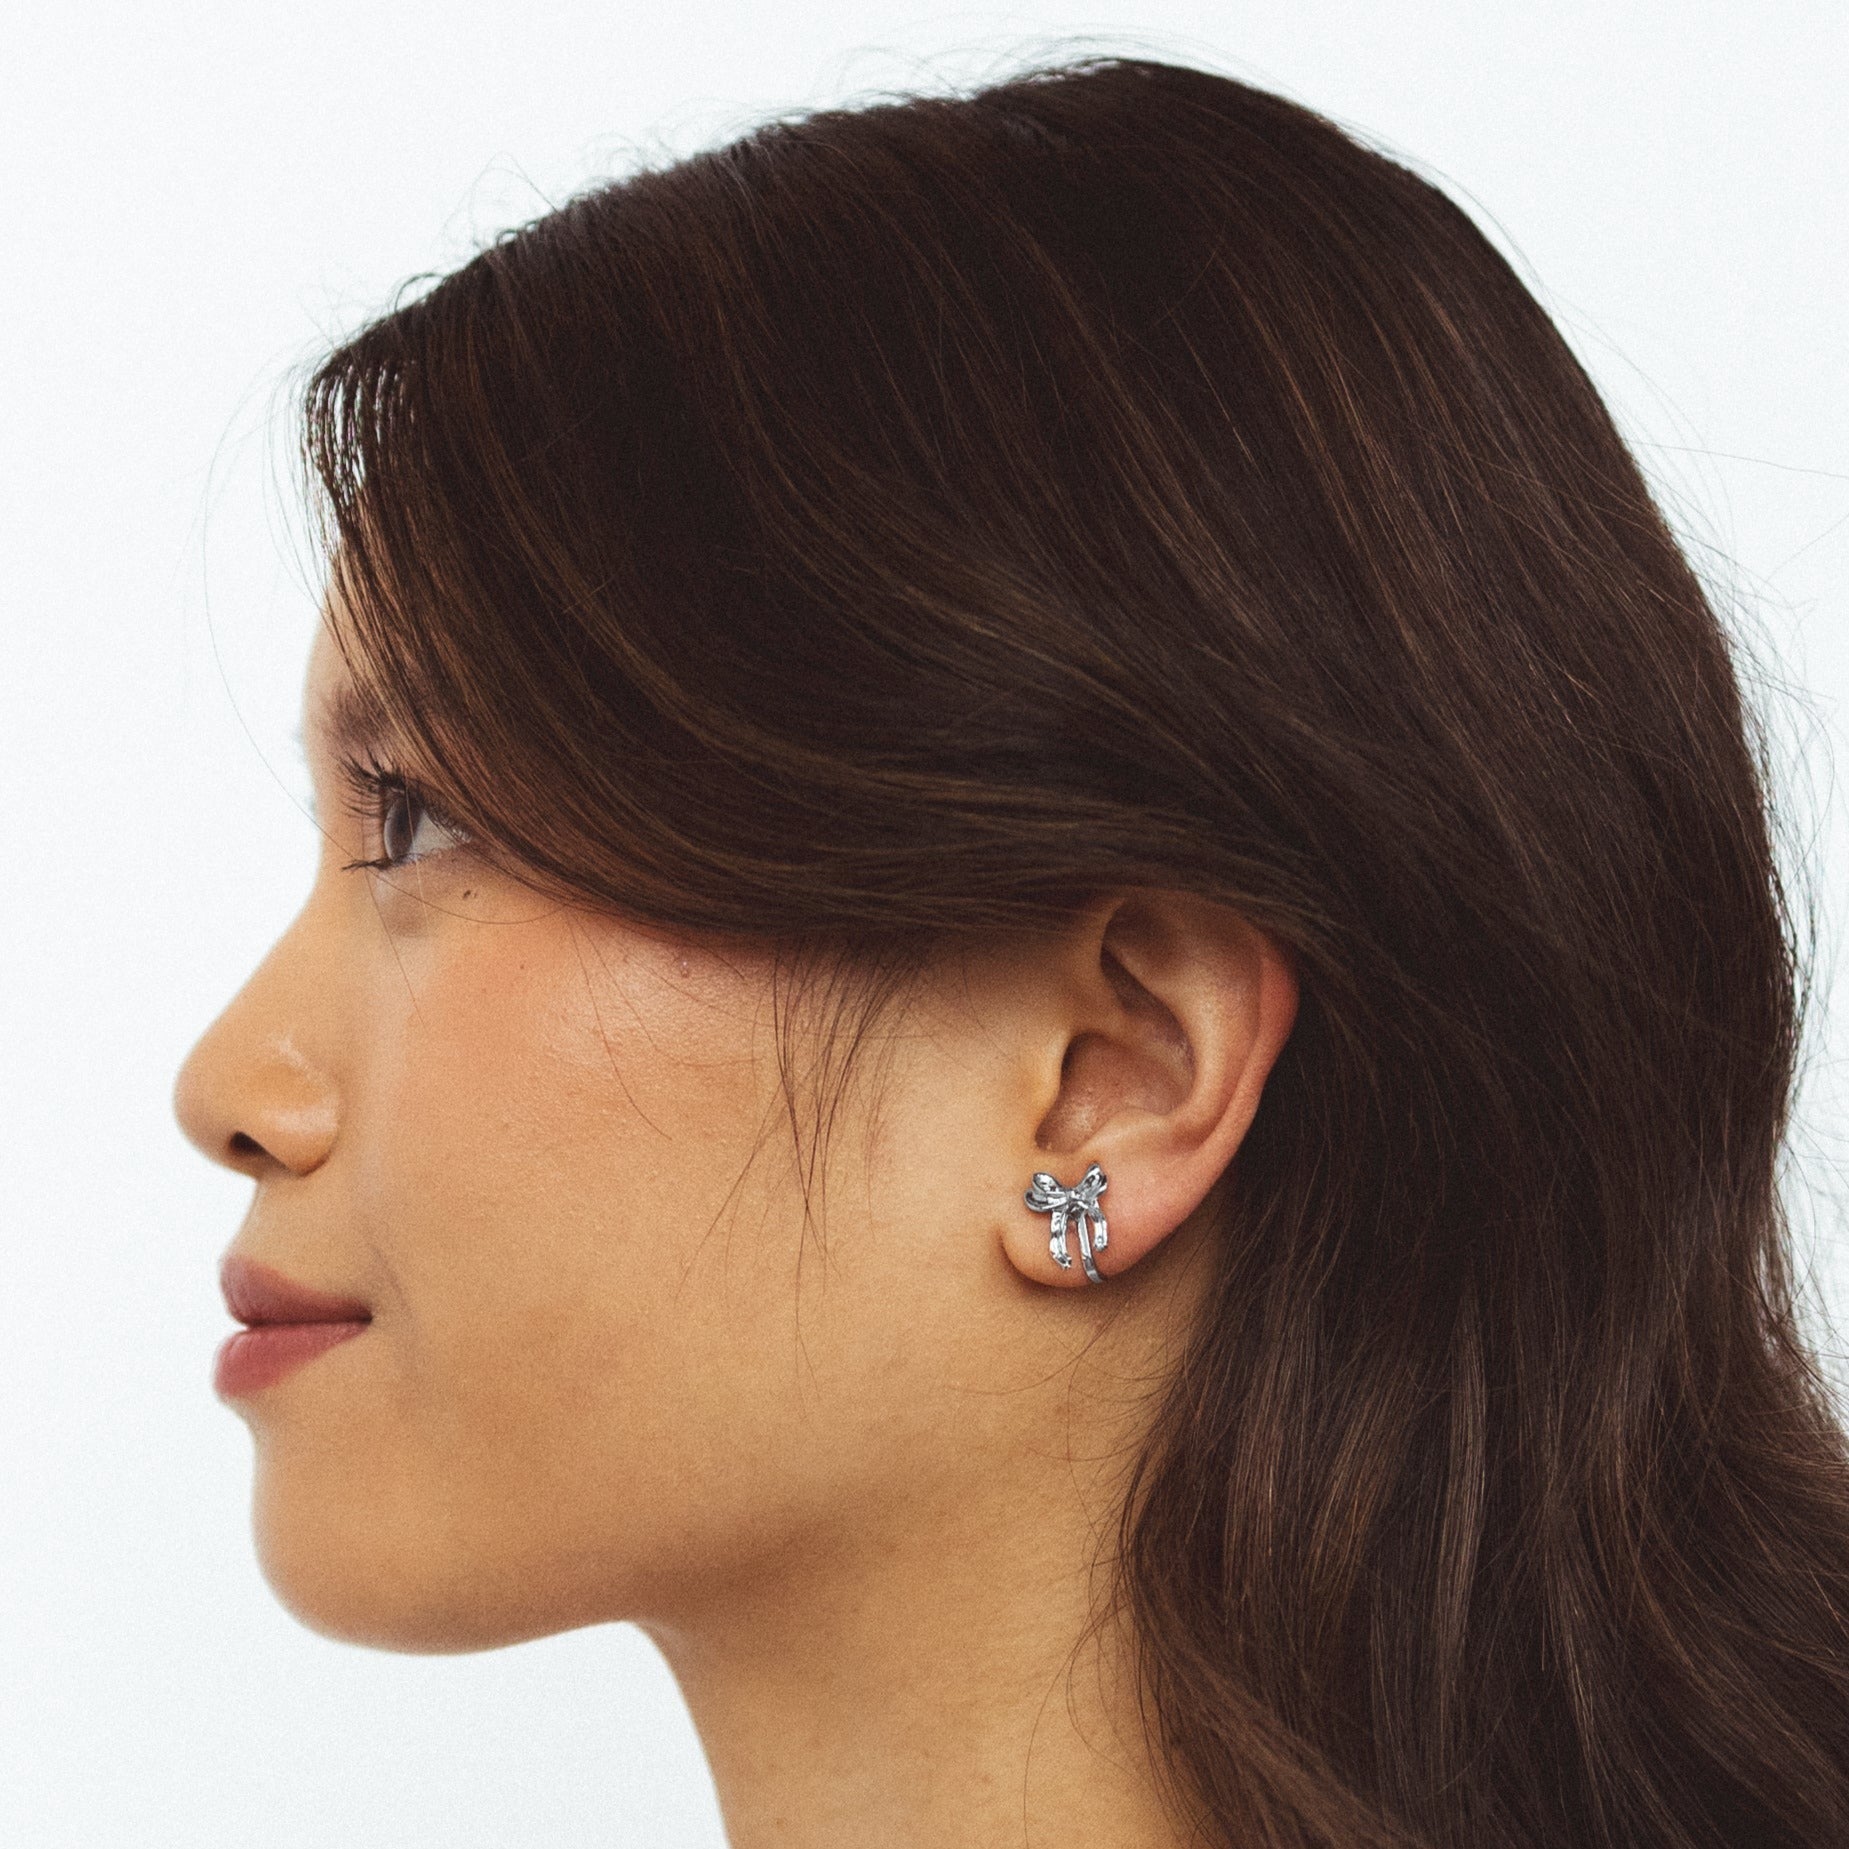 A model wearing the Taylor Clip On Earrings. Adjustable for sensitive or stretched ears, these earrings offer a 24-hour hold for effortless style at any occasion. Enjoy the perfect blend of elegance and ease with Taylor.